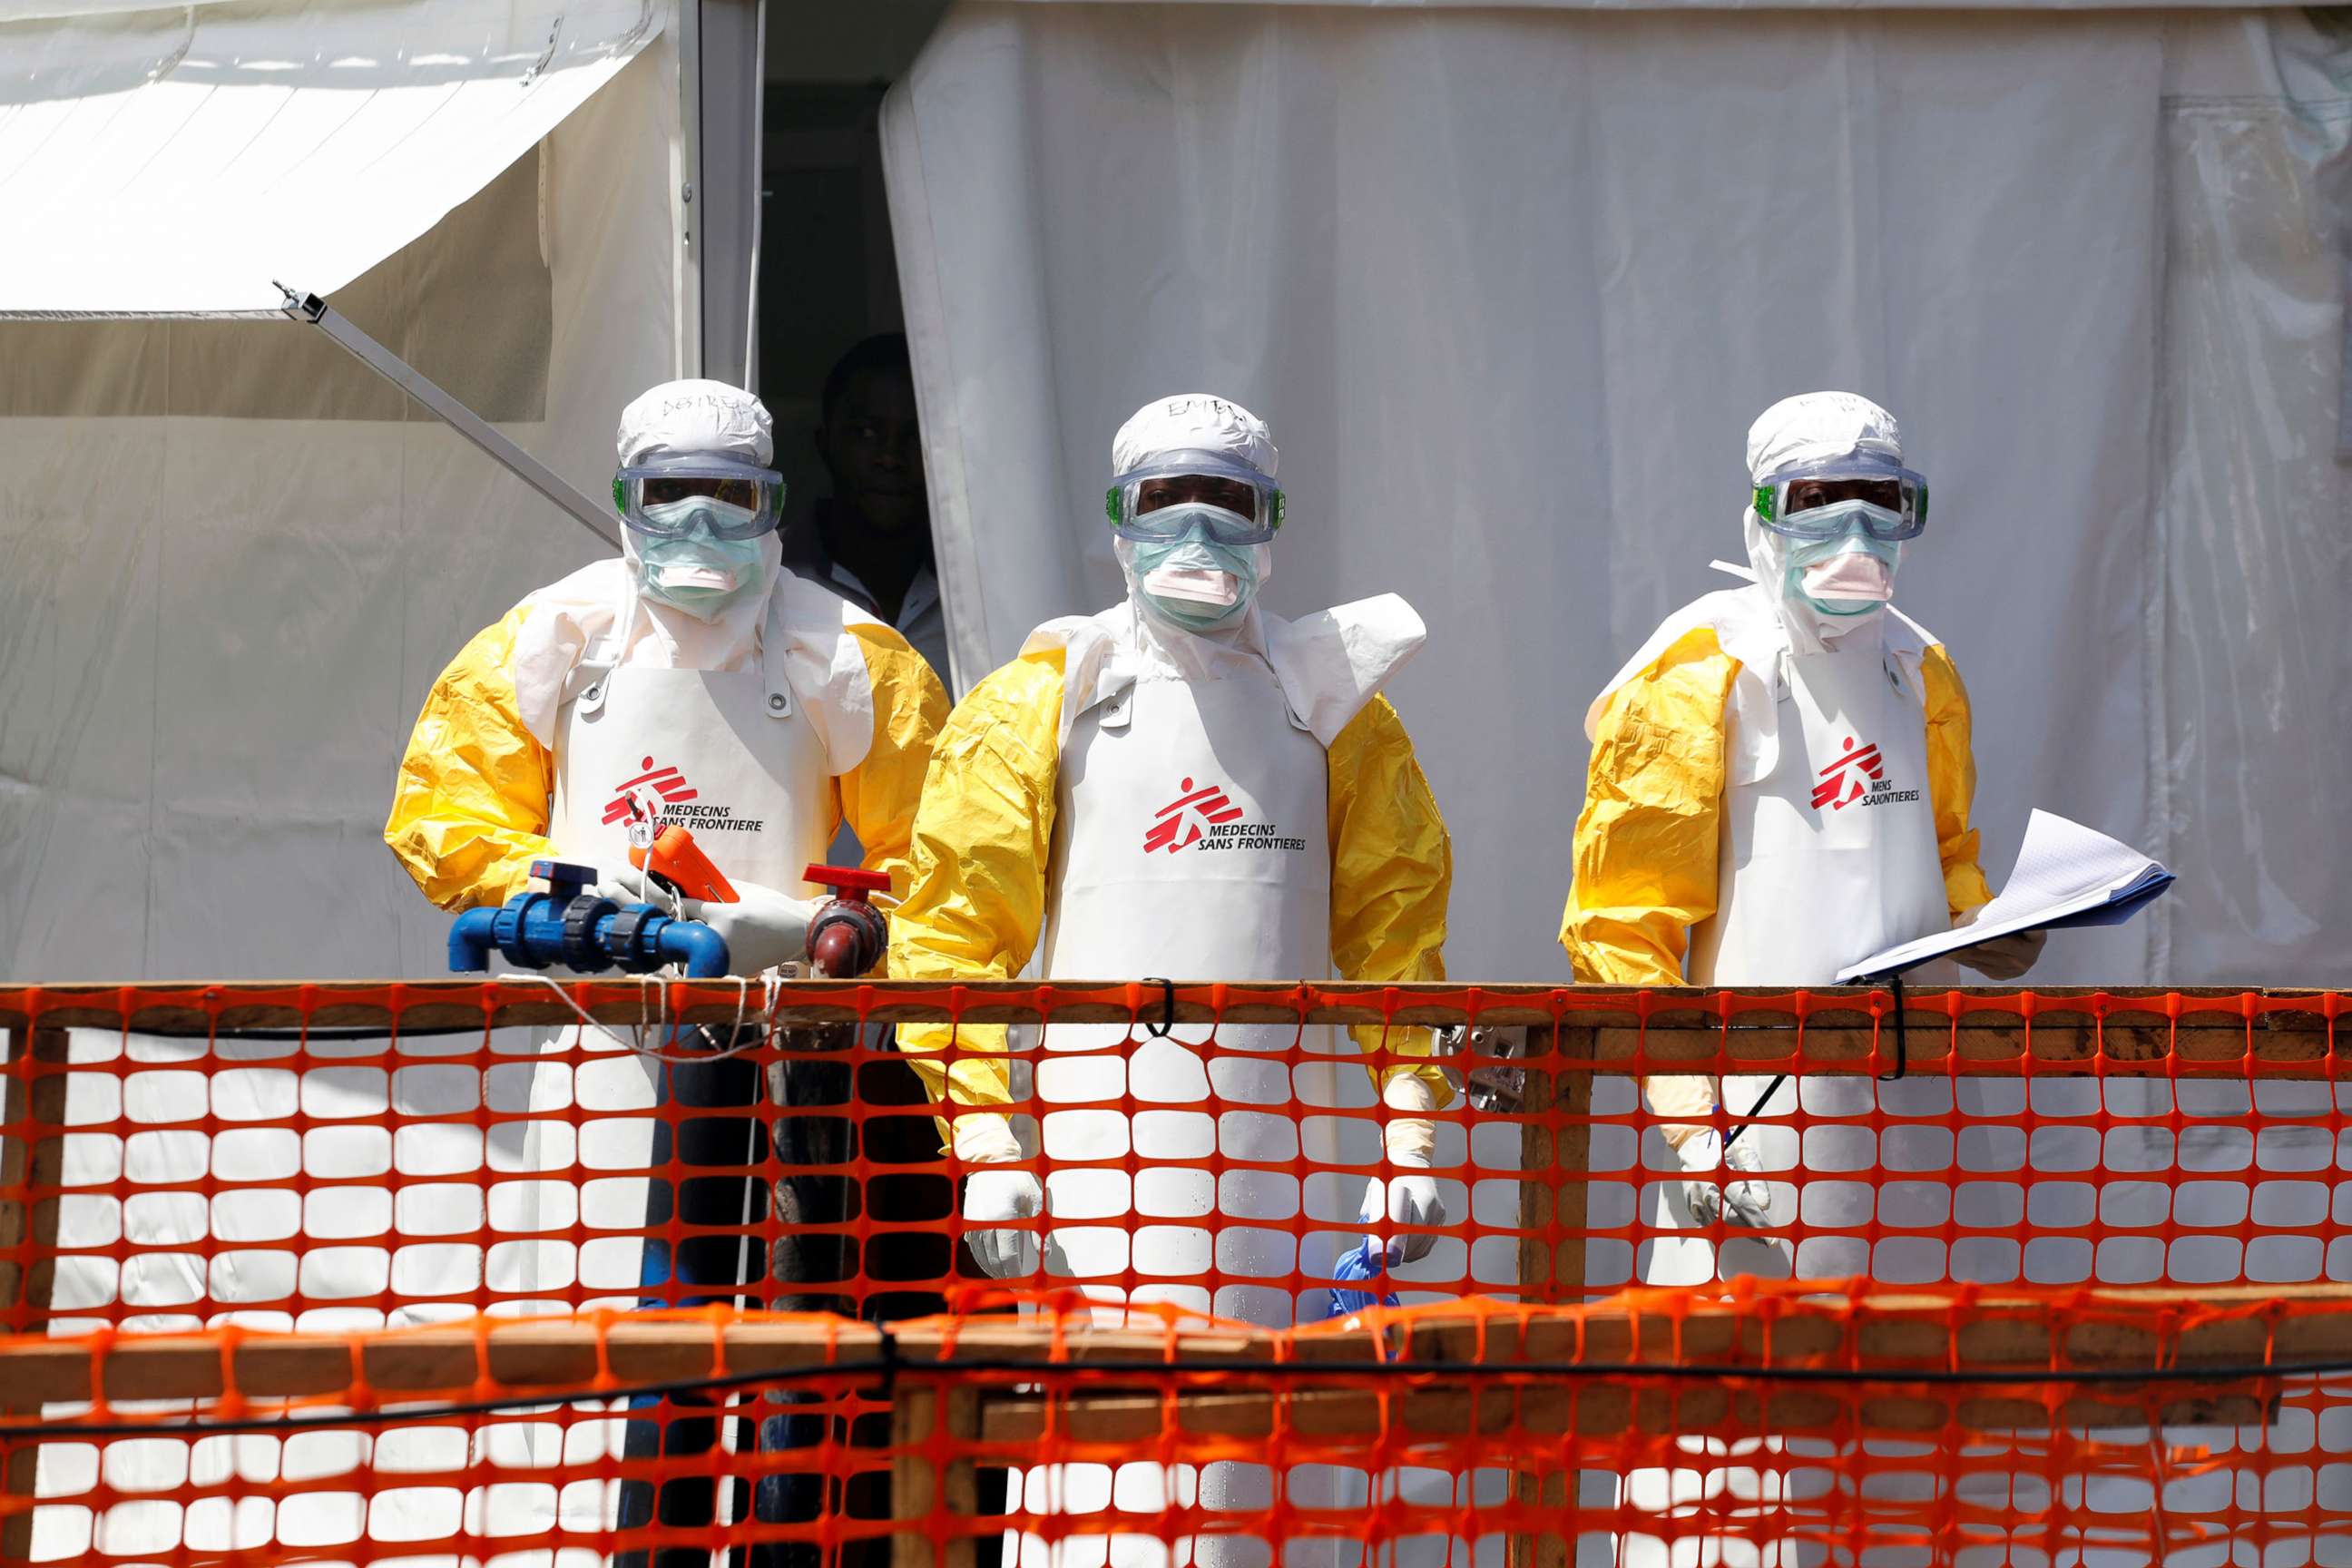 PHOTO: Health workers dressed in protective suits are seen at the newly constructed MSF(Doctors Without Borders) Ebola treatment center in Goma, Democratic Republic of Congo, Aug. 4, 2019.